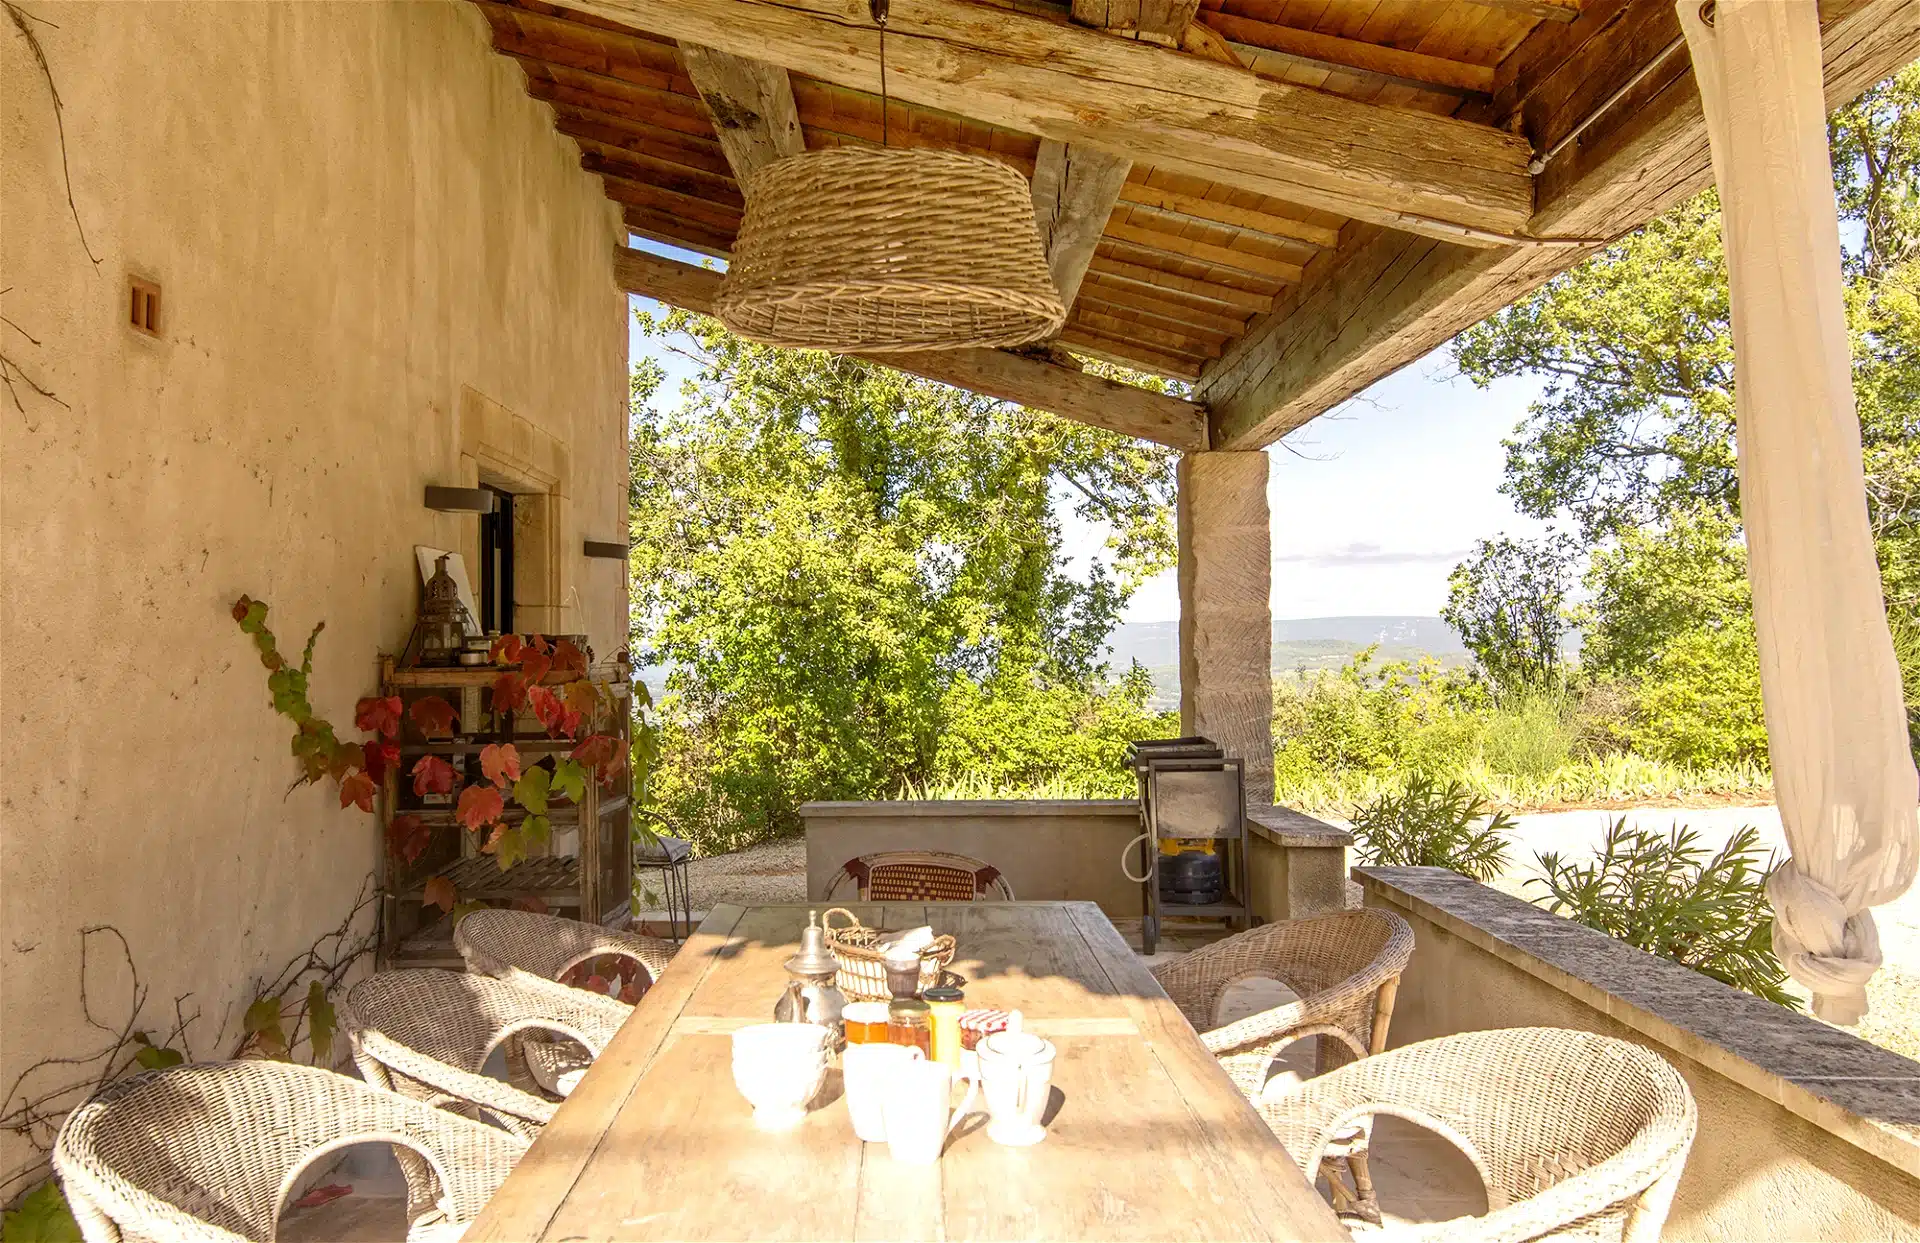 Provence luxury villa outside dining, fundraiser auction items, live auction items